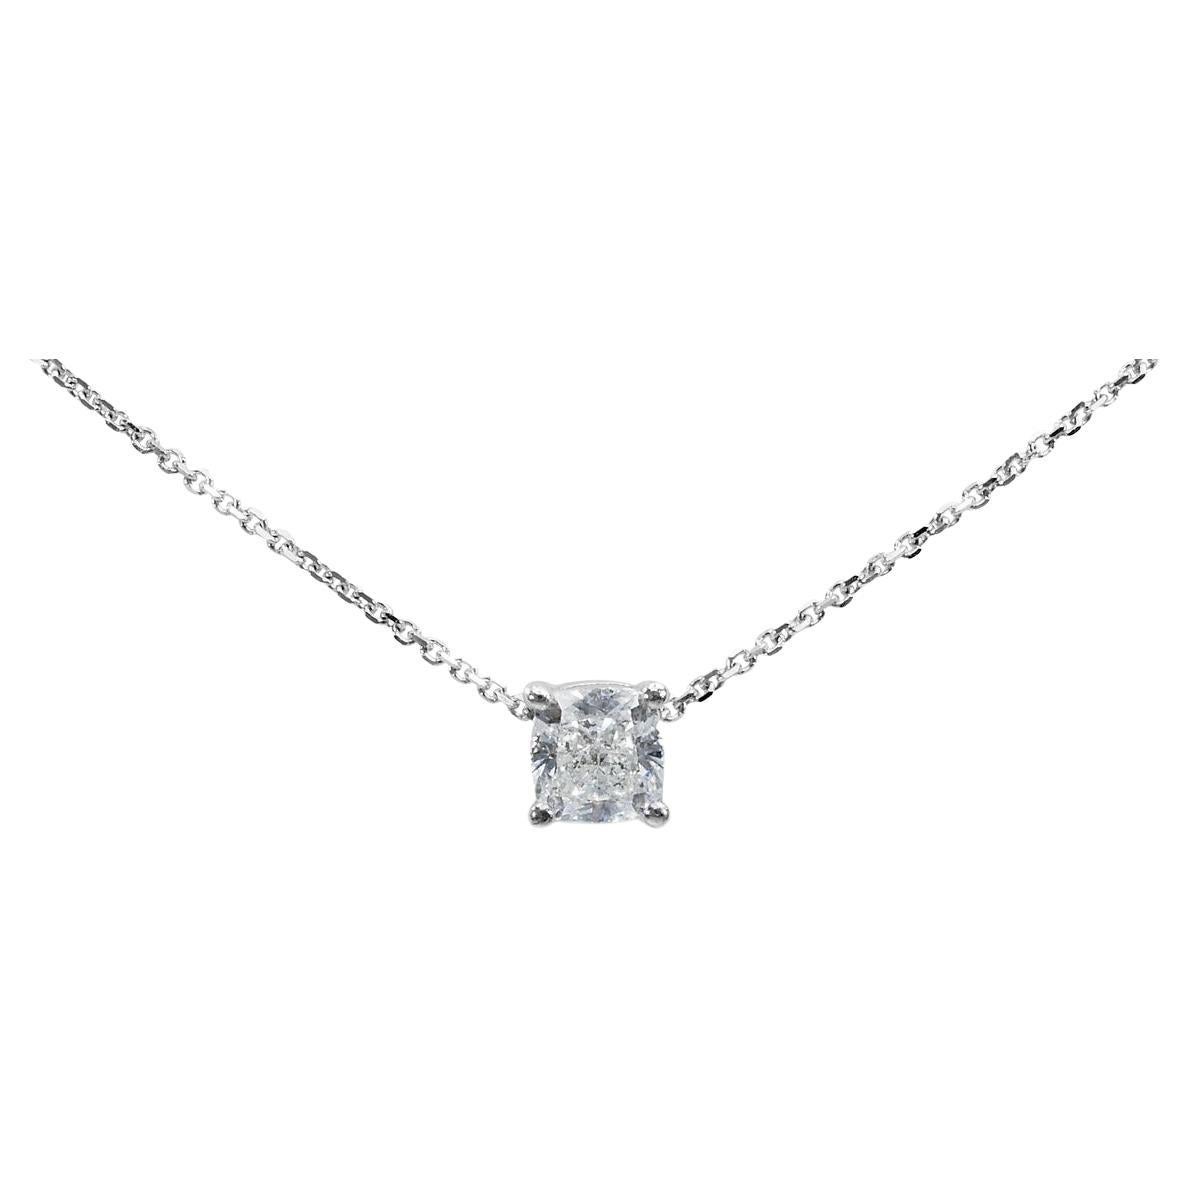 Marvelous 18k White Gold Classic Necklace w/ 0.73 Natural Diamond GIA Cert For Sale